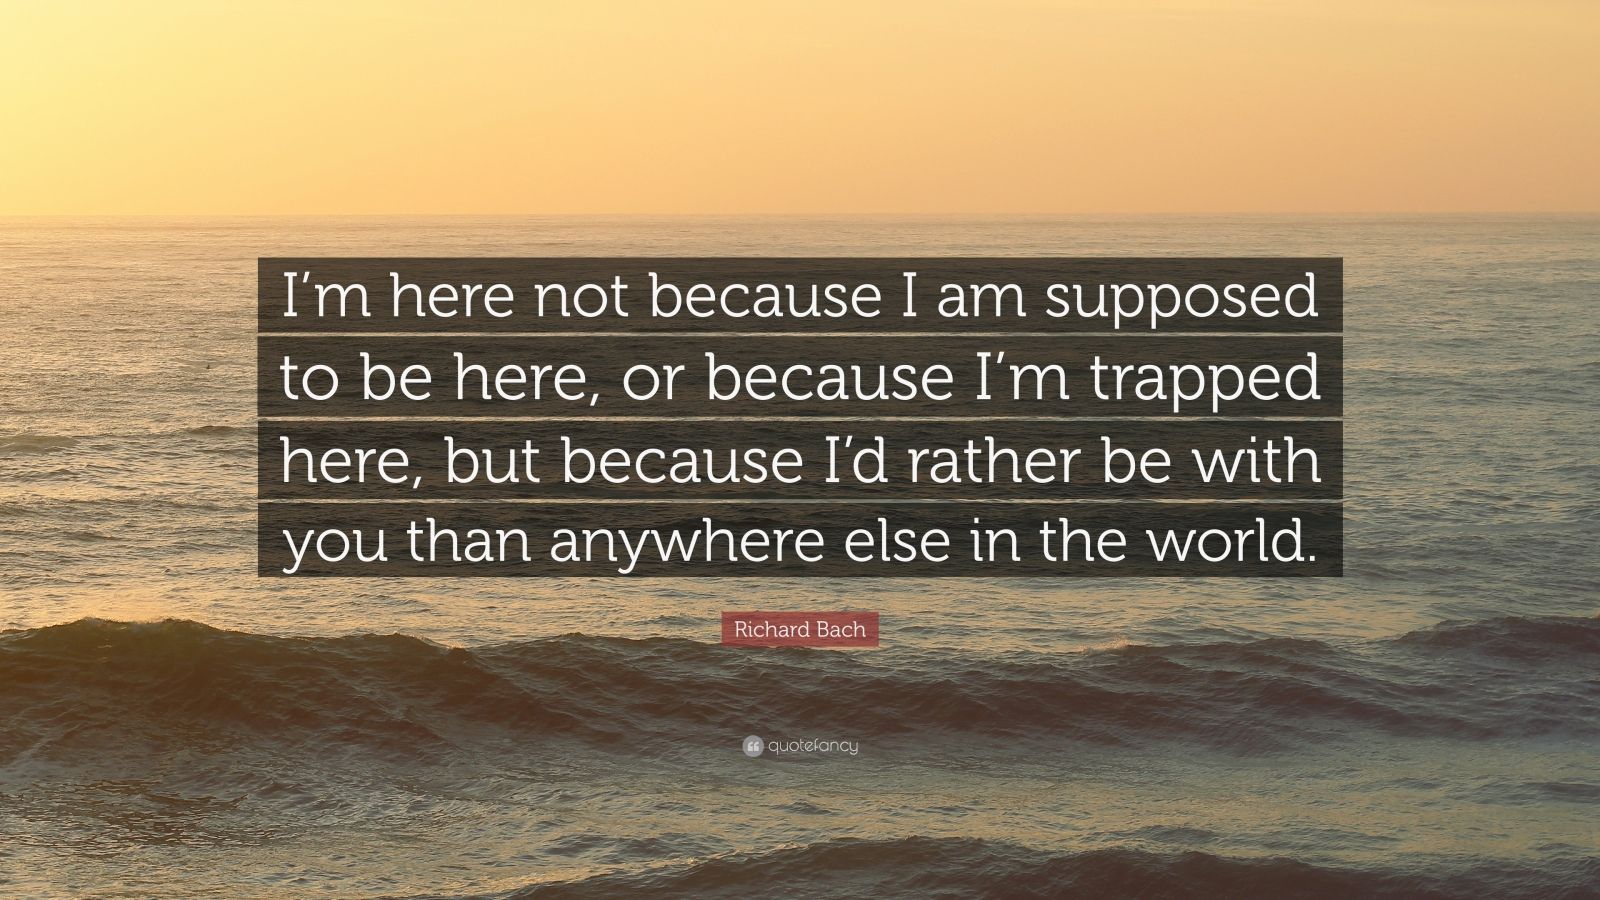 Richard Bach Quote: "I'm here not because I am supposed to ...